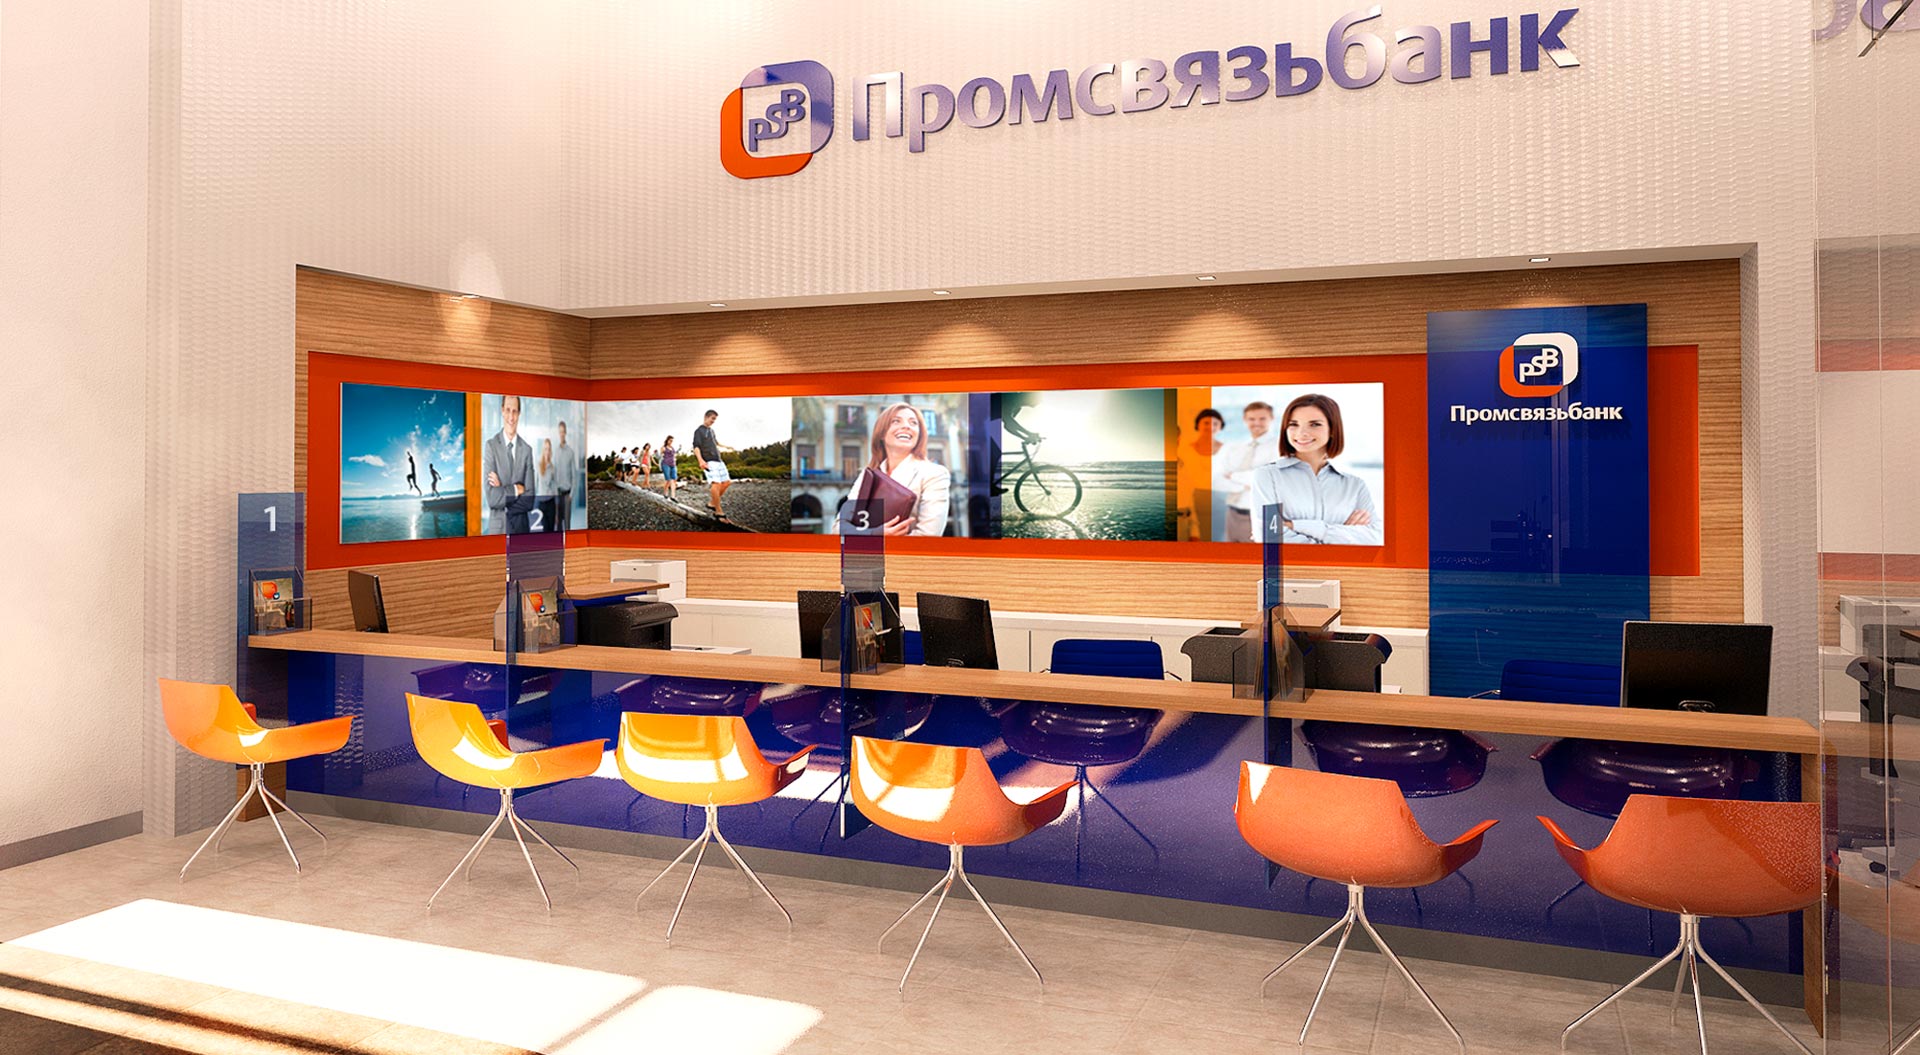 PSB bank branch design inspiration ideas and branding concepts